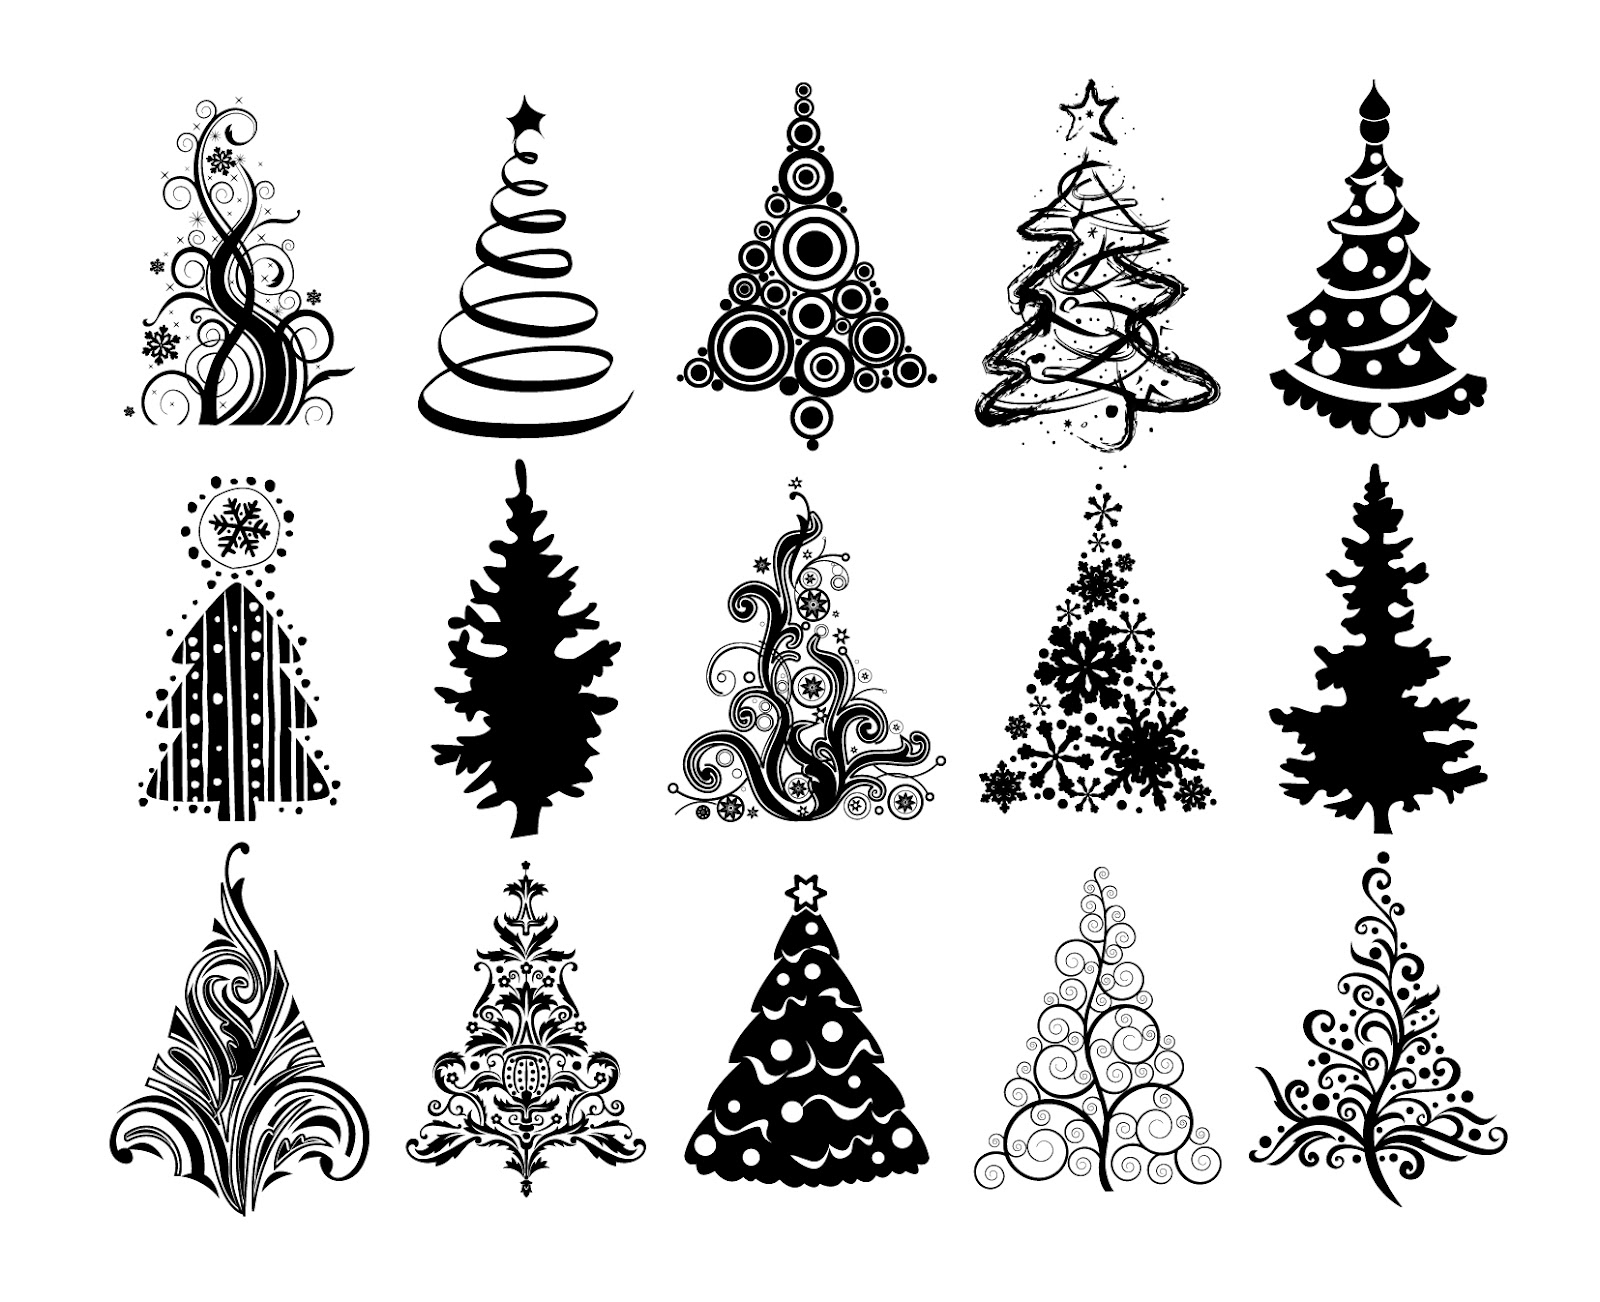 18 Christmas Silhouette Vector Images - Christmas Tree Silhouette Vector, Christmas Vector